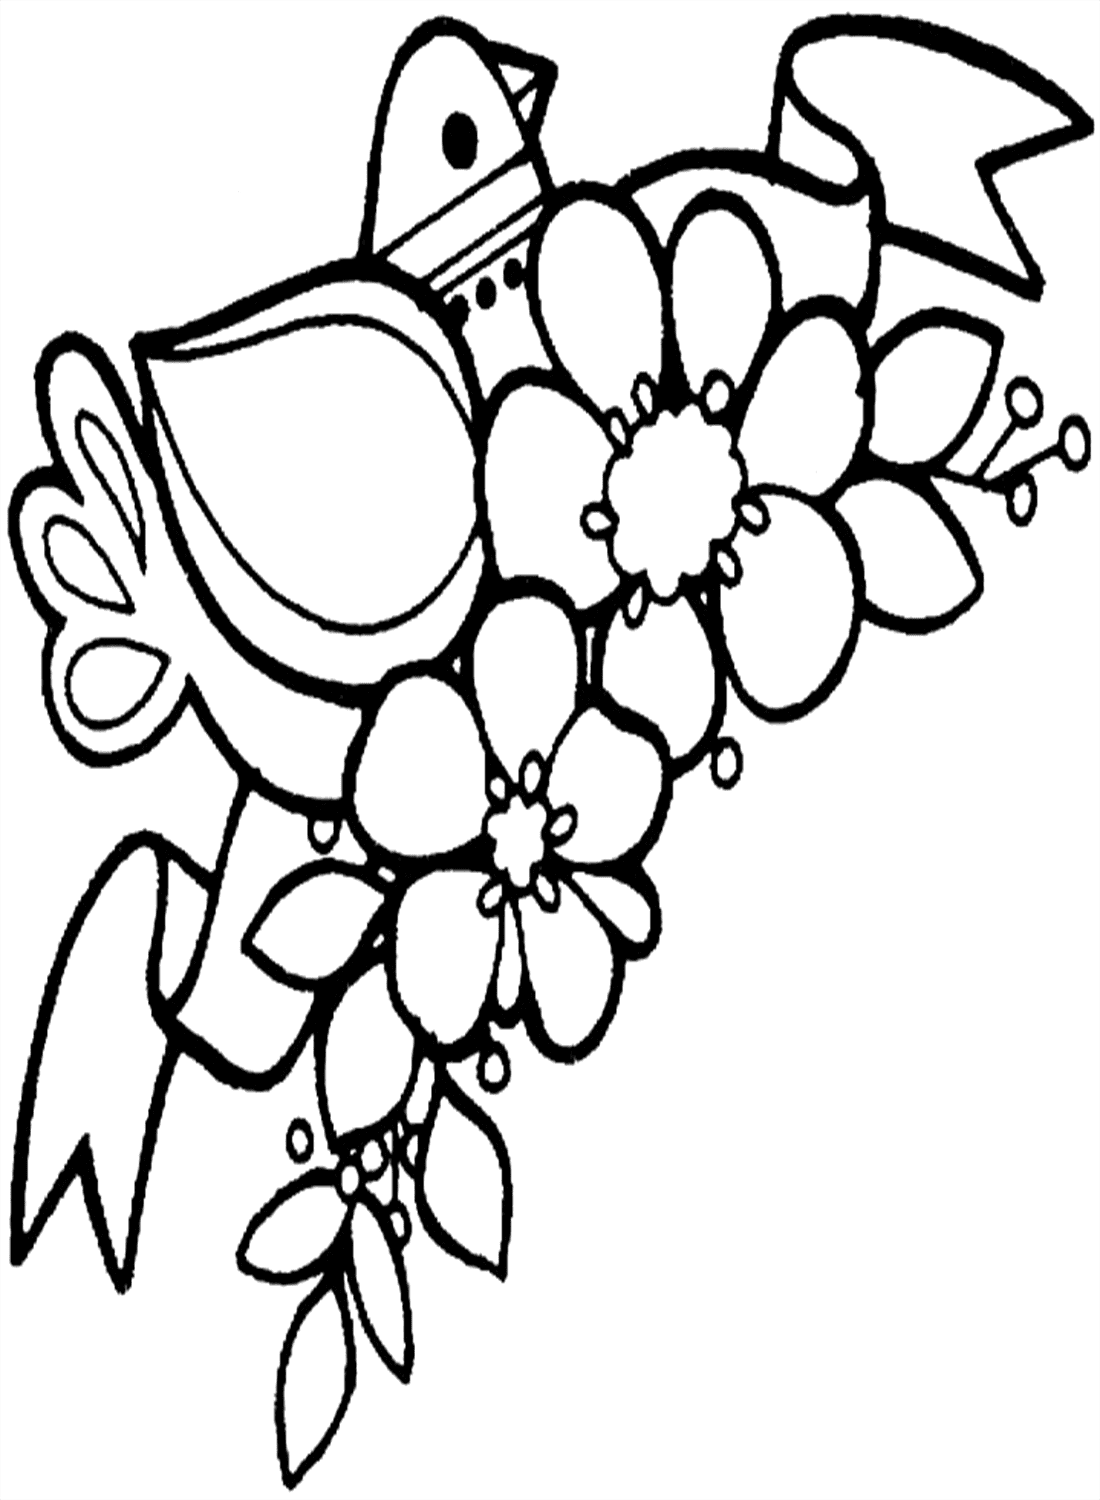 A Bird and Flowering Branch Coloring Pages